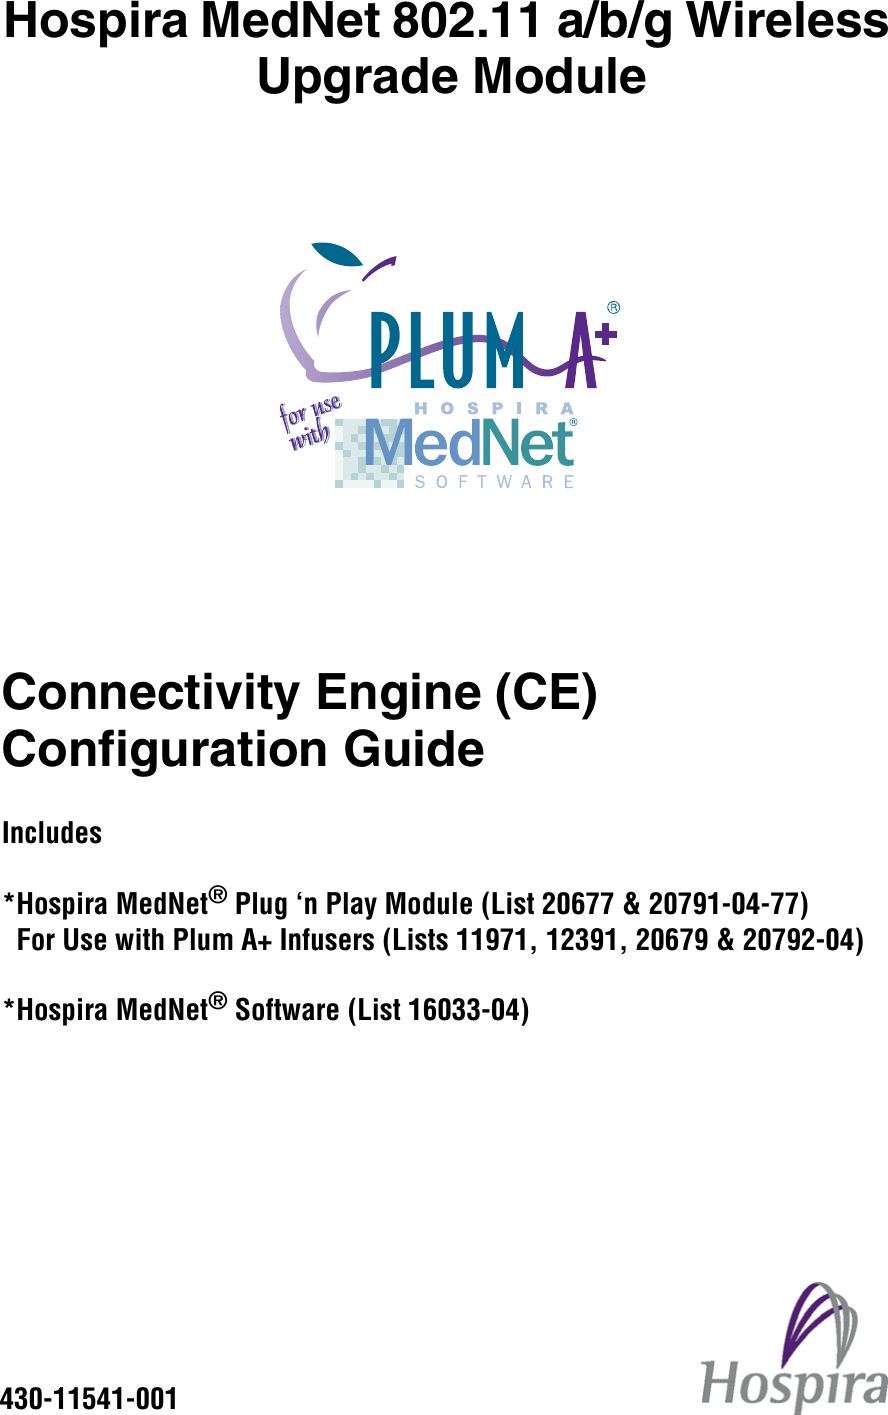 Hospira MedNet 802.11 a/b/g Wireless Upgrade ModuleConnectivity Engine (CE) Configuration GuideIncludes*Hospira MedNet® Plug ‘n Play Module (List 20677 &amp; 20791-04-77)  For Use with Plum A+ Infusers (Lists 11971, 12391, 20679 &amp; 20792-04)*Hospira MedNet® Software (List 16033-04)430-11541-001